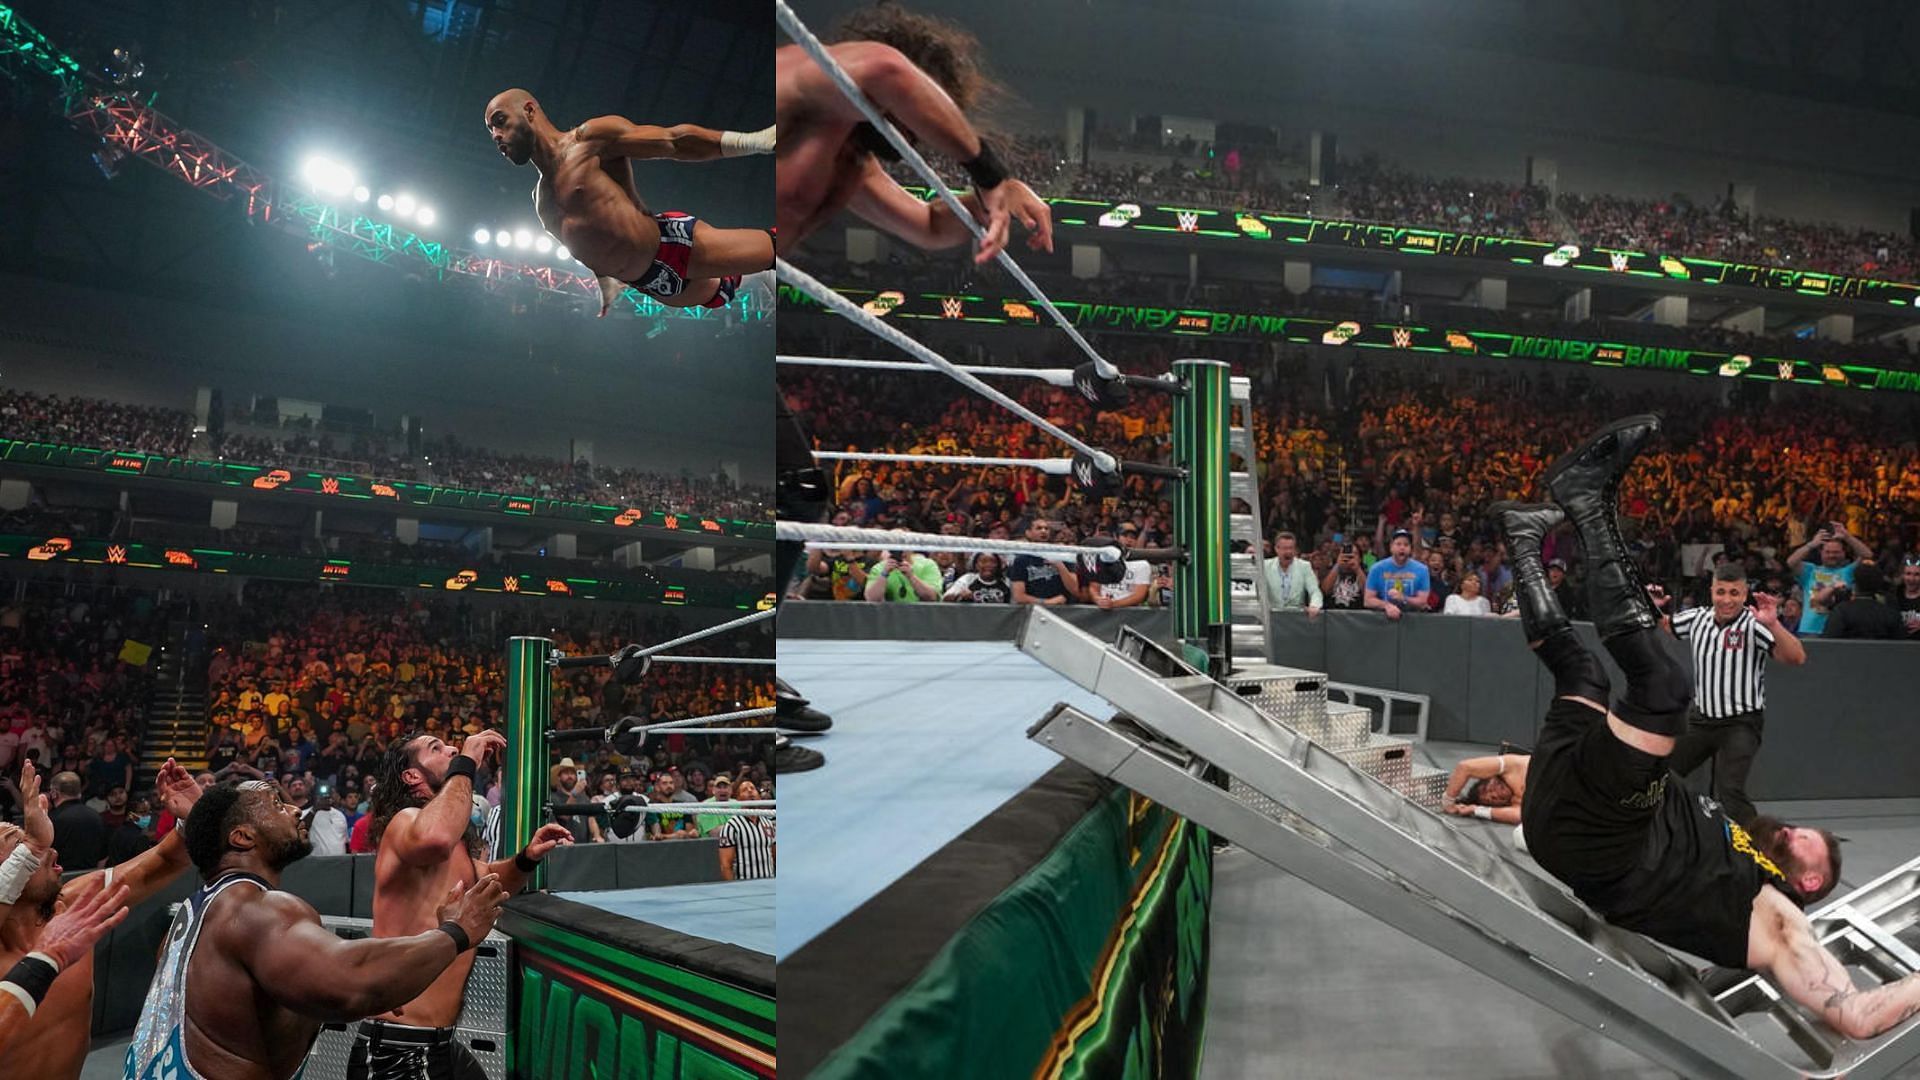 Money in the Bank ladder matches are brutal